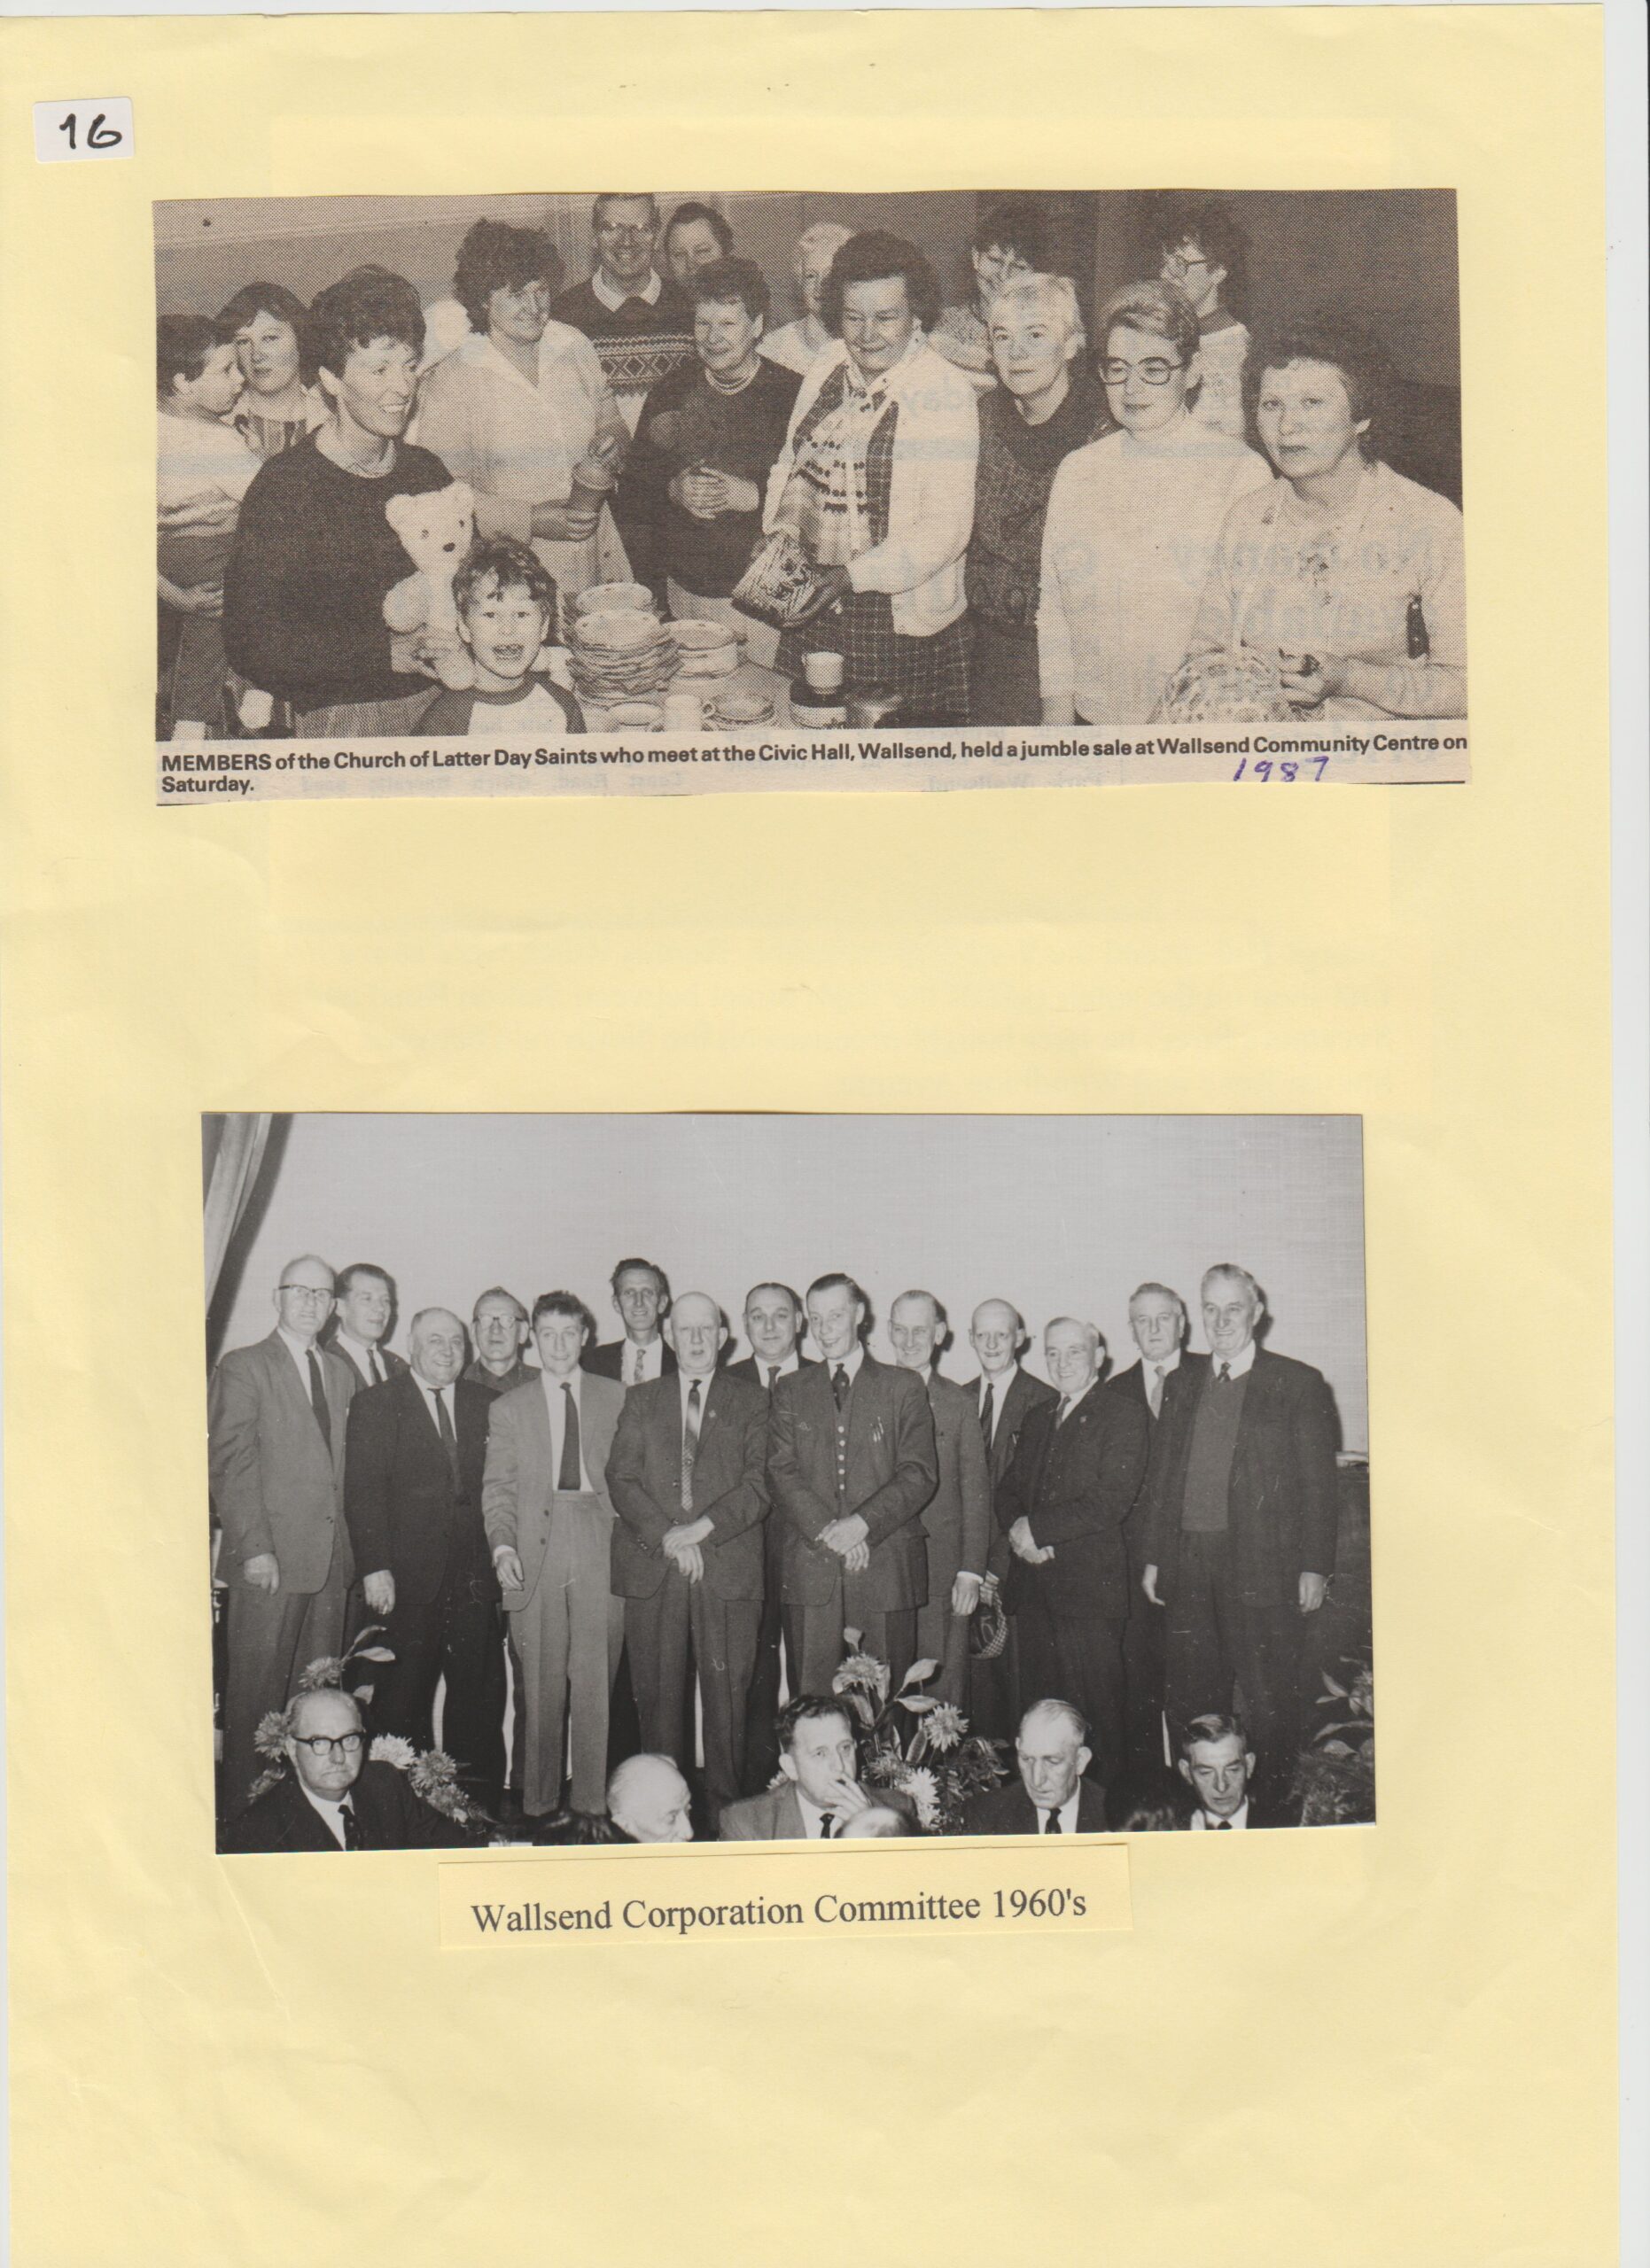 Members of Church of the latter day saints jumble sale 1987 _ Wallsend Corporation Committe 1960